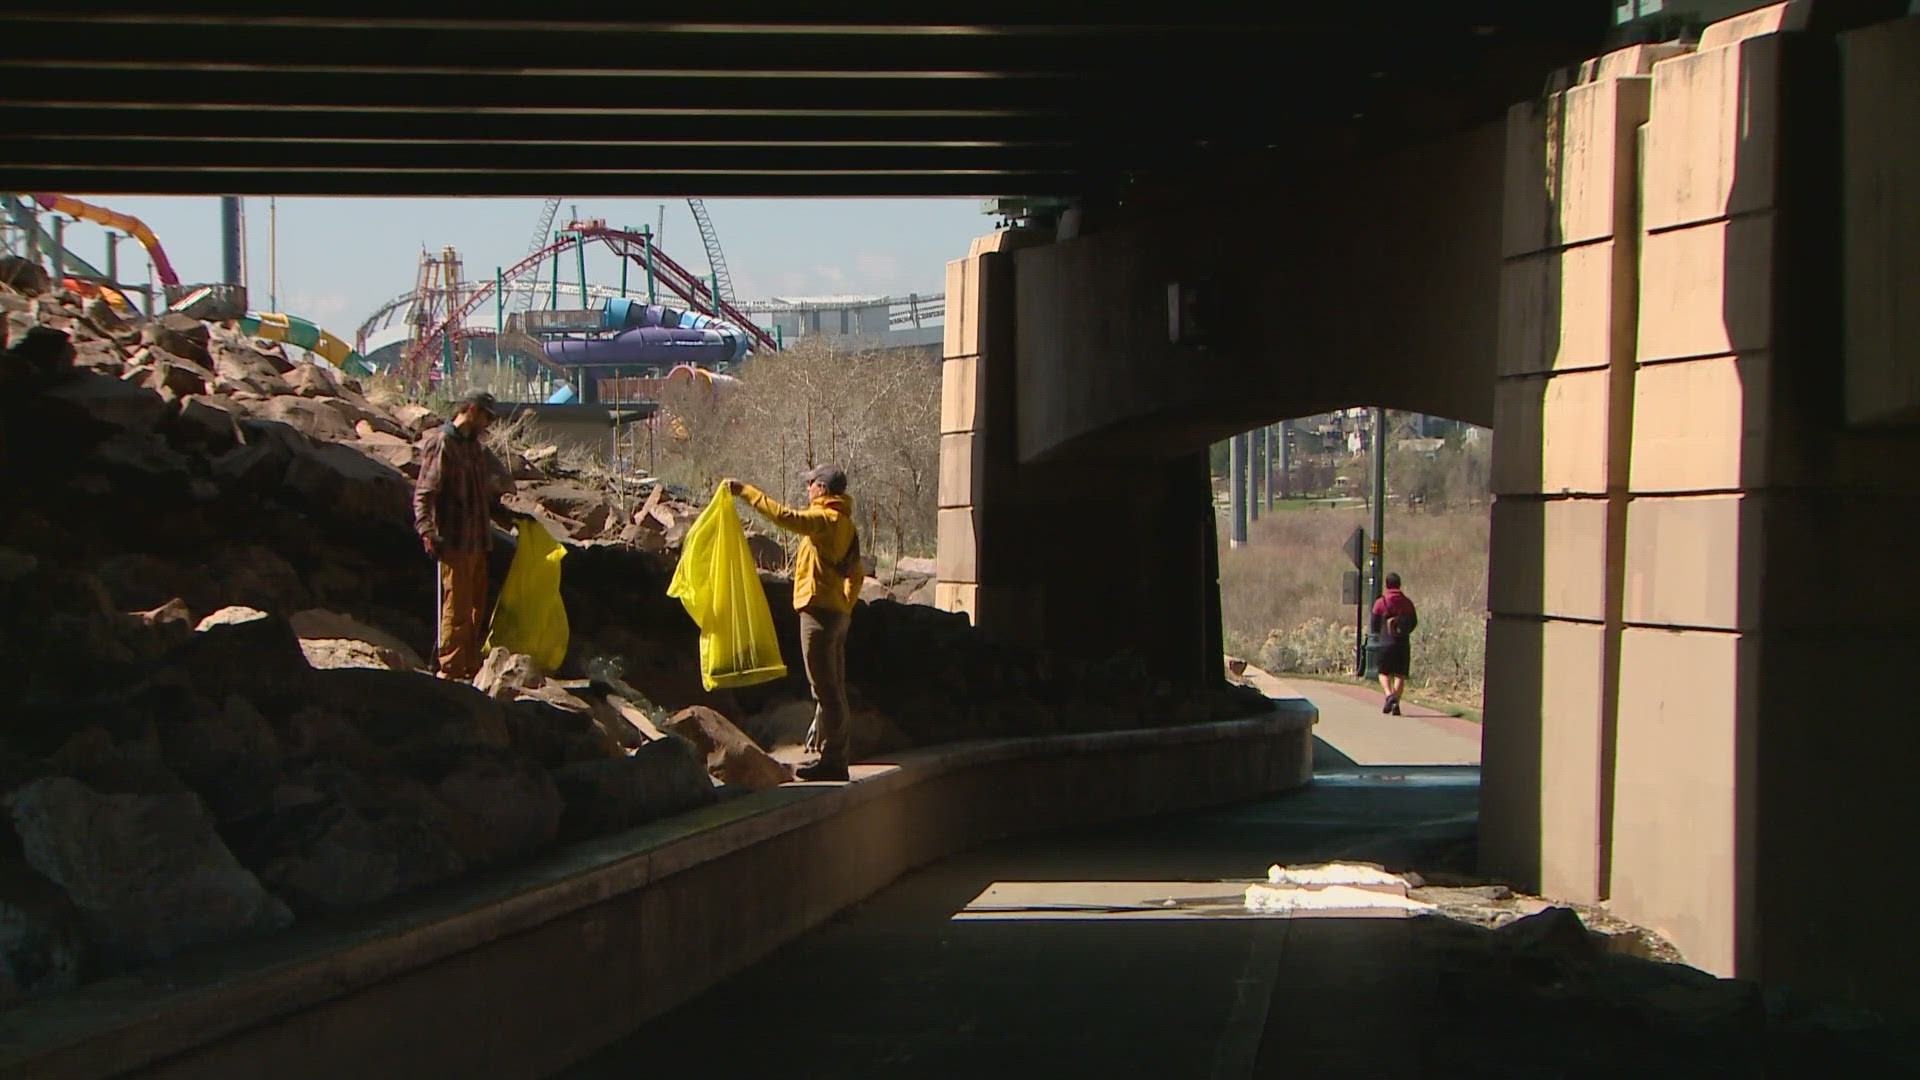 Volunteers helped pick up garbage and other debris along the South Platte River in downtown Denver Sunday.